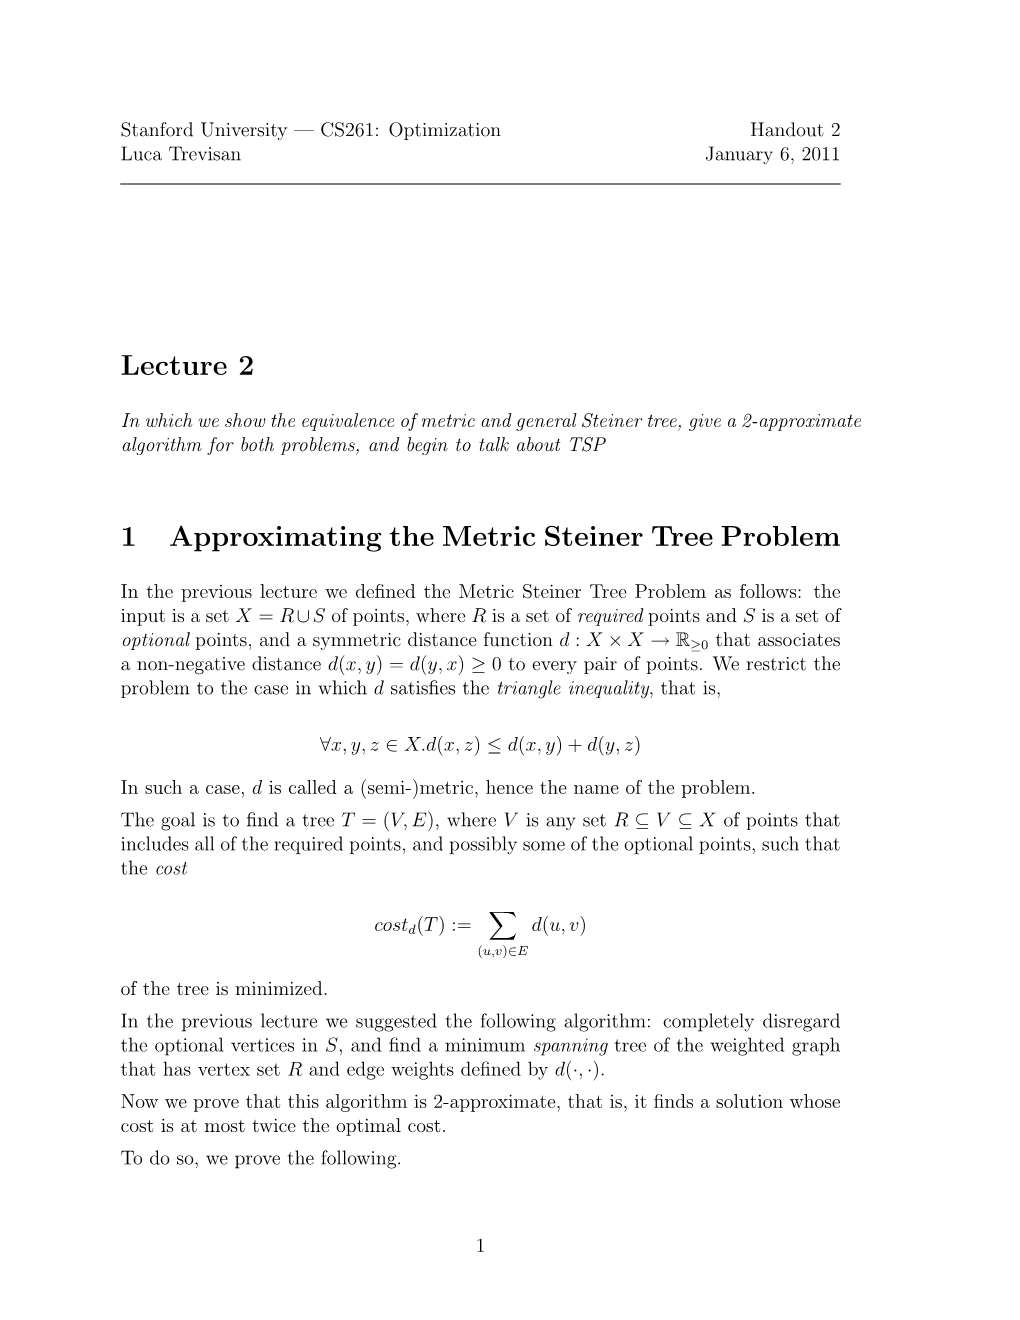 Lecture 2 1 Approximating the Metric Steiner Tree Problem